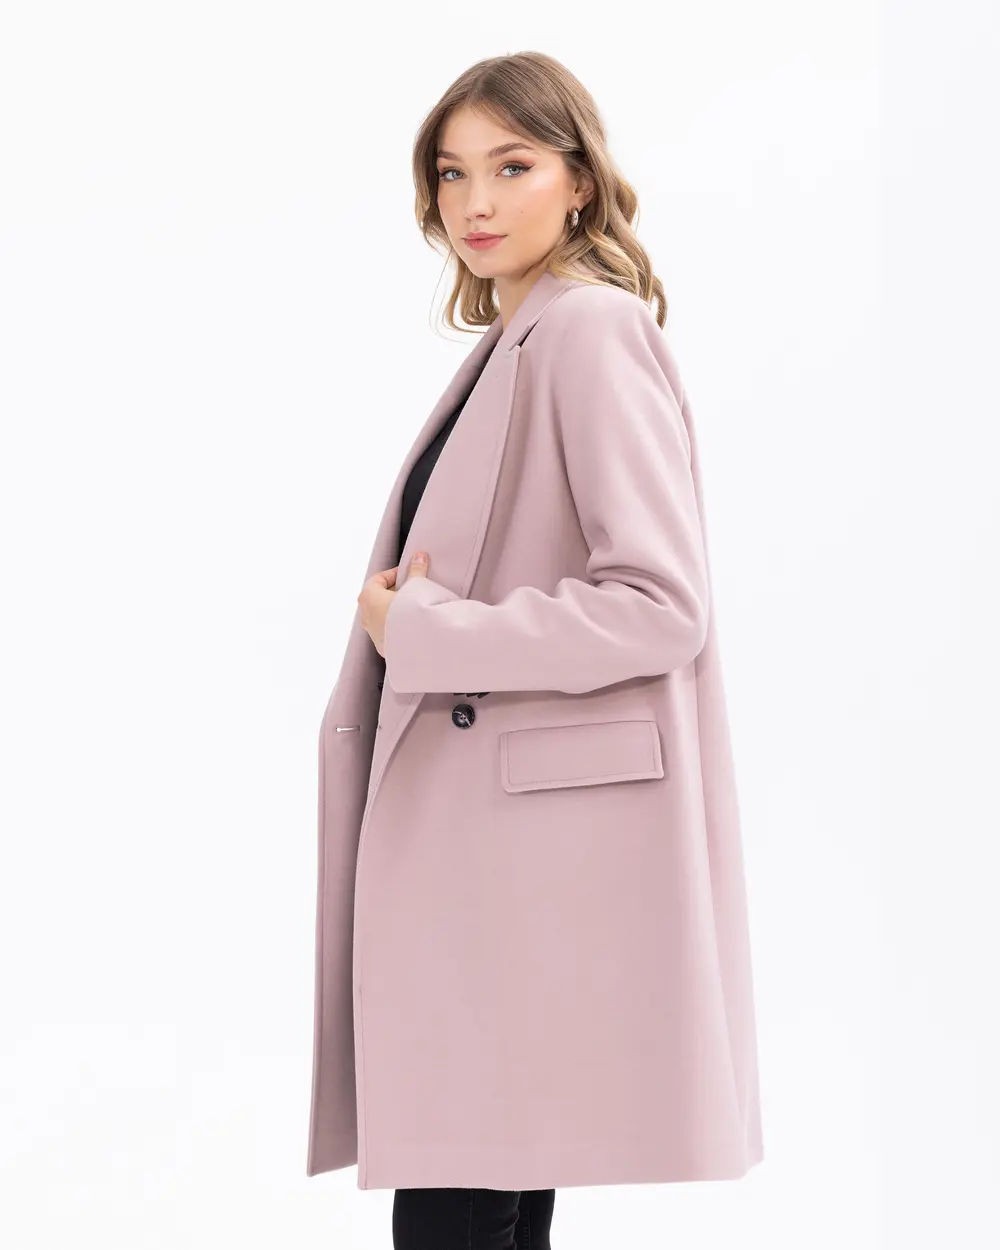 Contrast Button Double Breasted Collar Coat